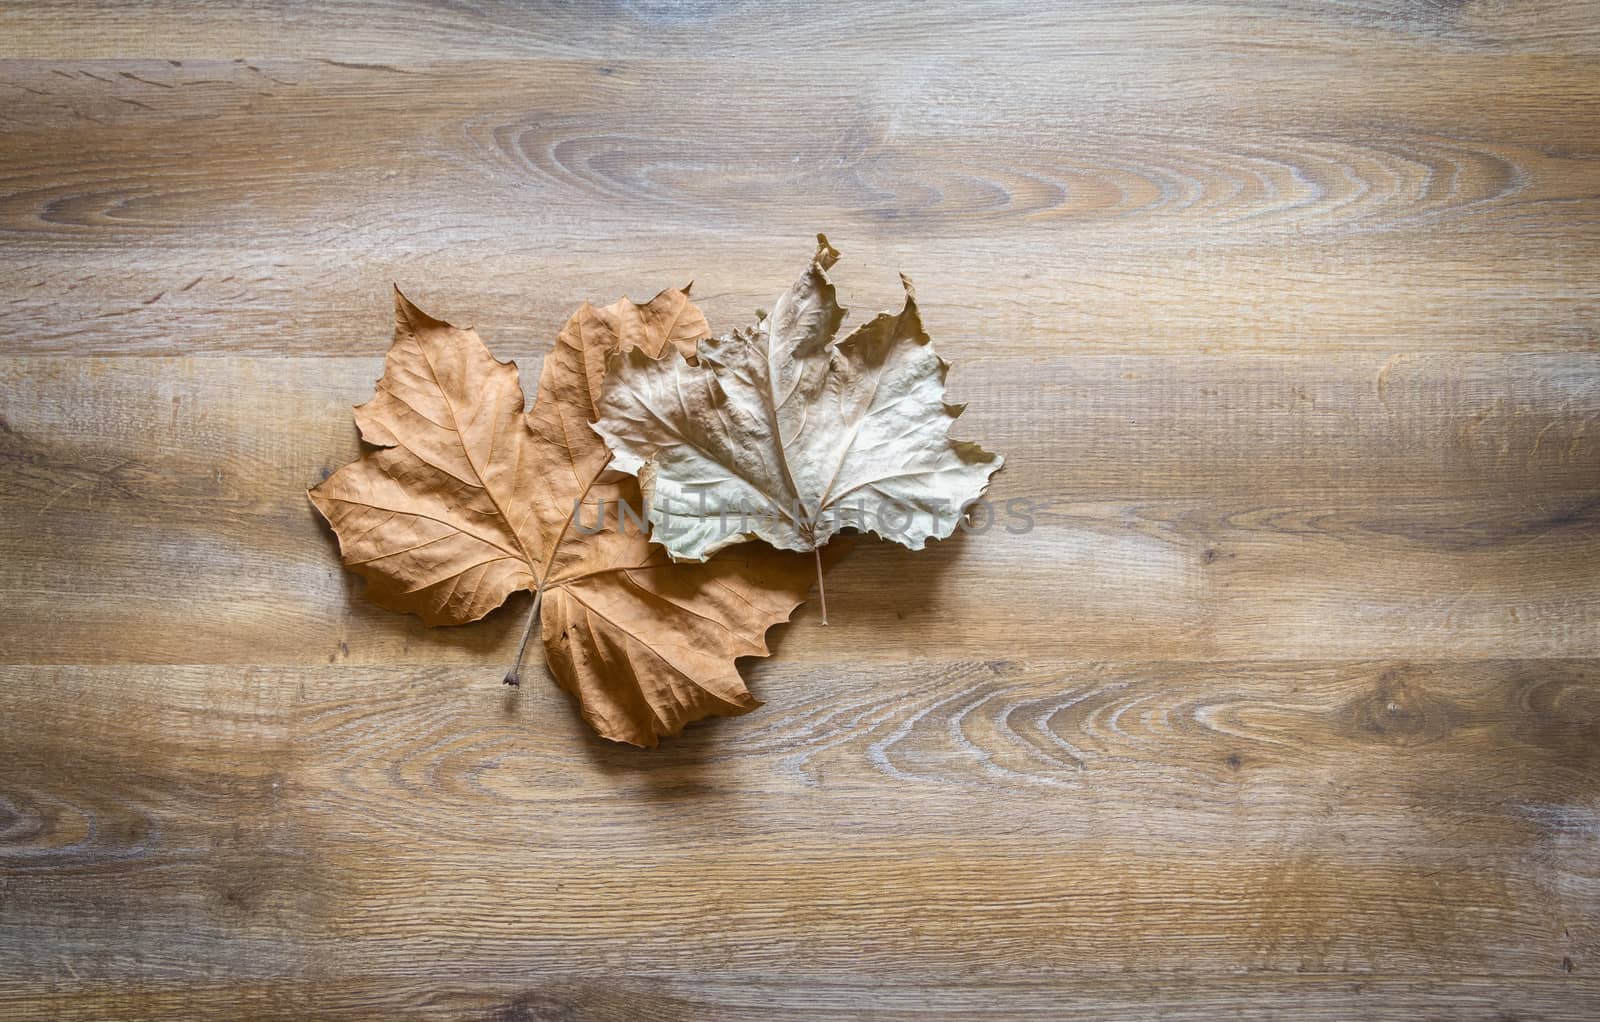 Autumn leaves in a wooden background by doble.d